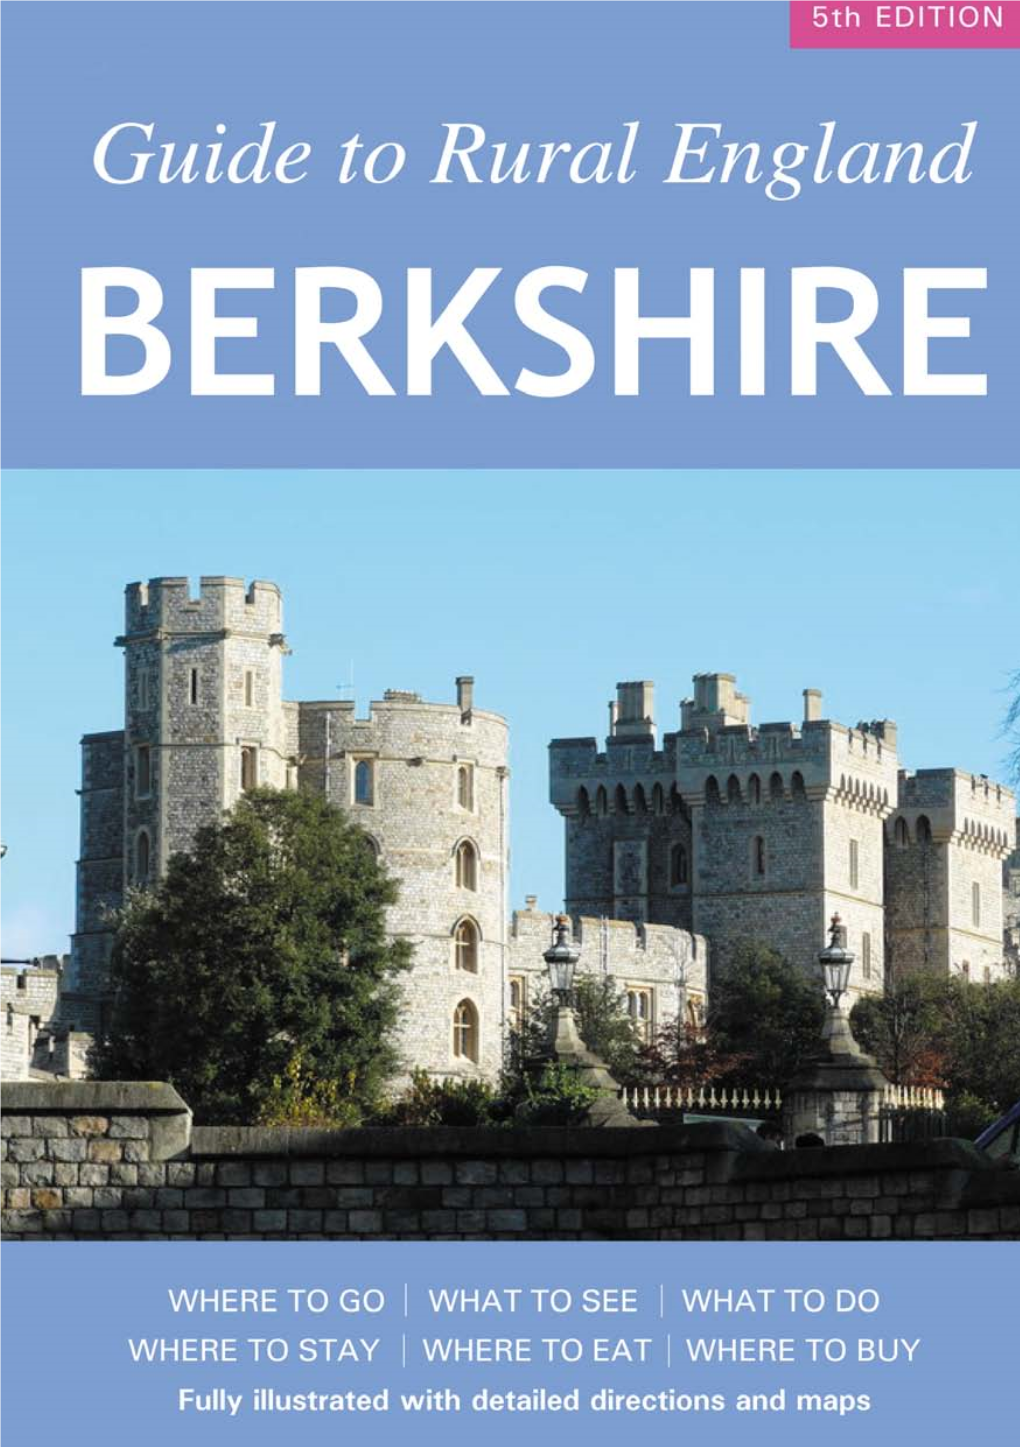 Guide to R Ural England BERKSHIRE